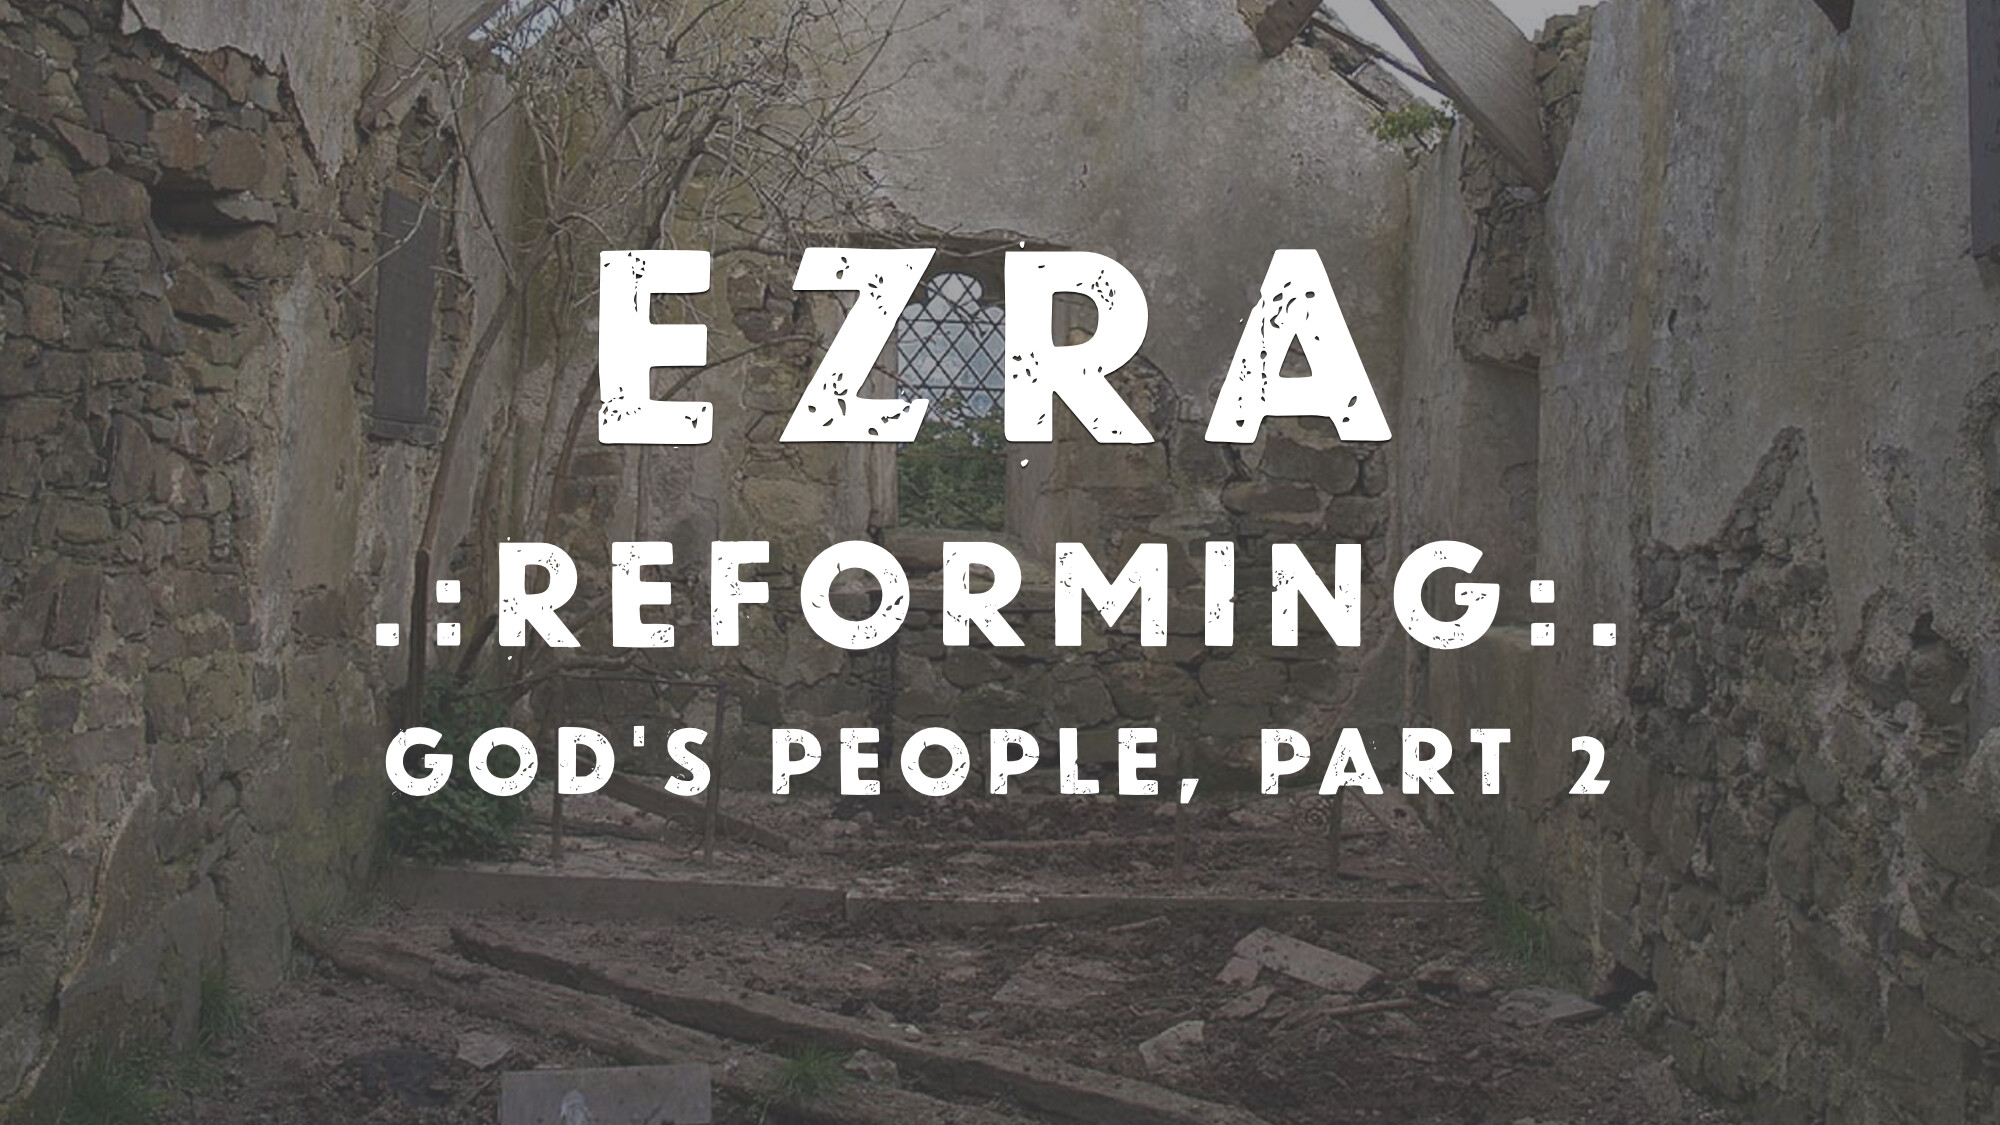 Reforming God's People, Part 2